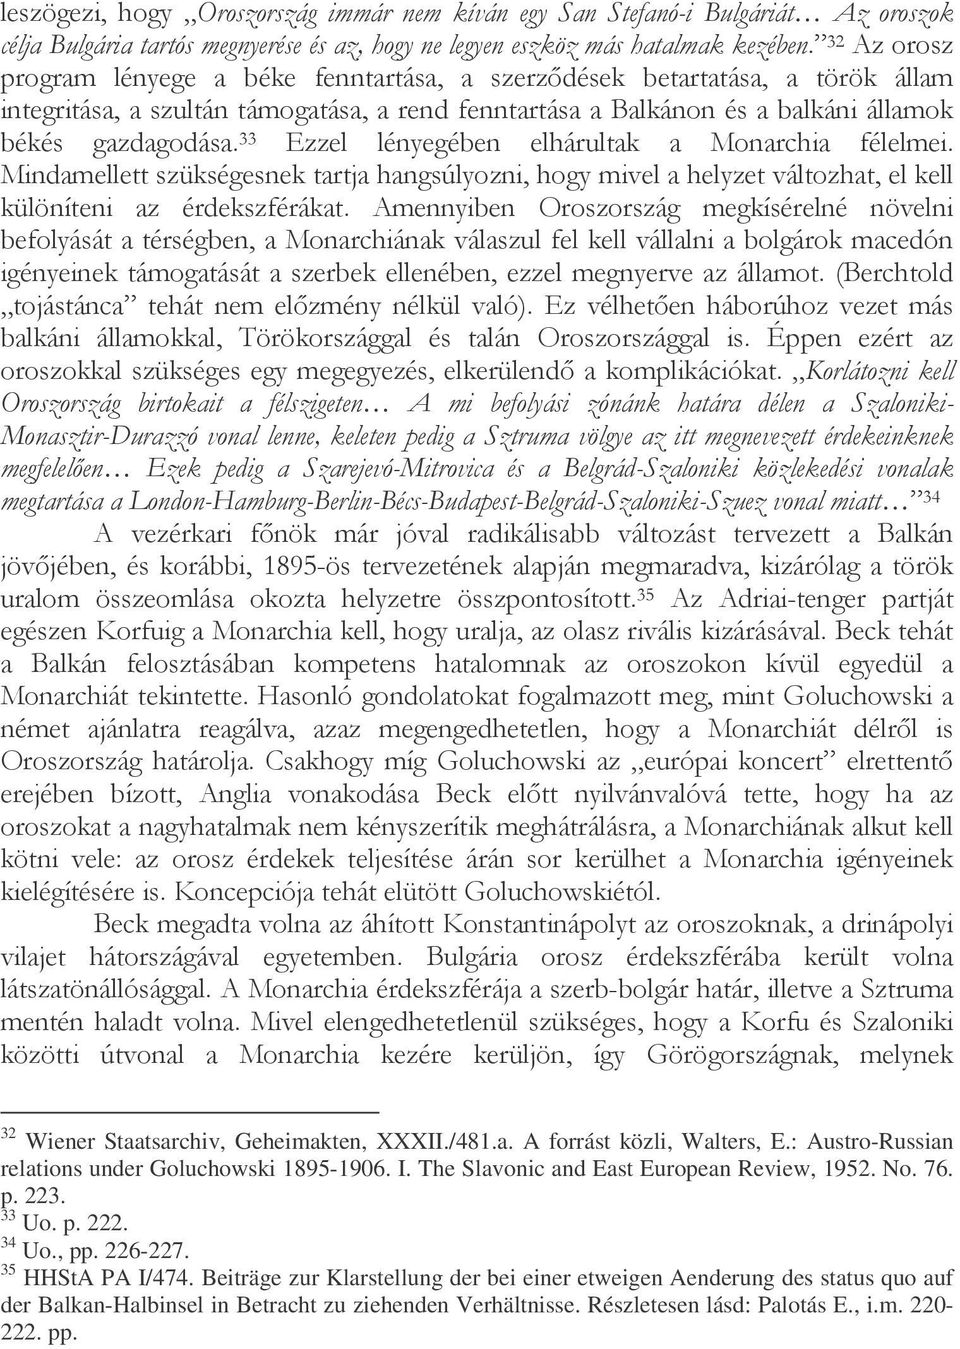 : Austro-Russian relations under Goluchowski 1895-1906. I. The Slavonic and East European Review, 1952. No. 76. p. 223. 33 Uo. p. 222. 34 Uo., pp. 226-227. 35 HHStA PA I/474.